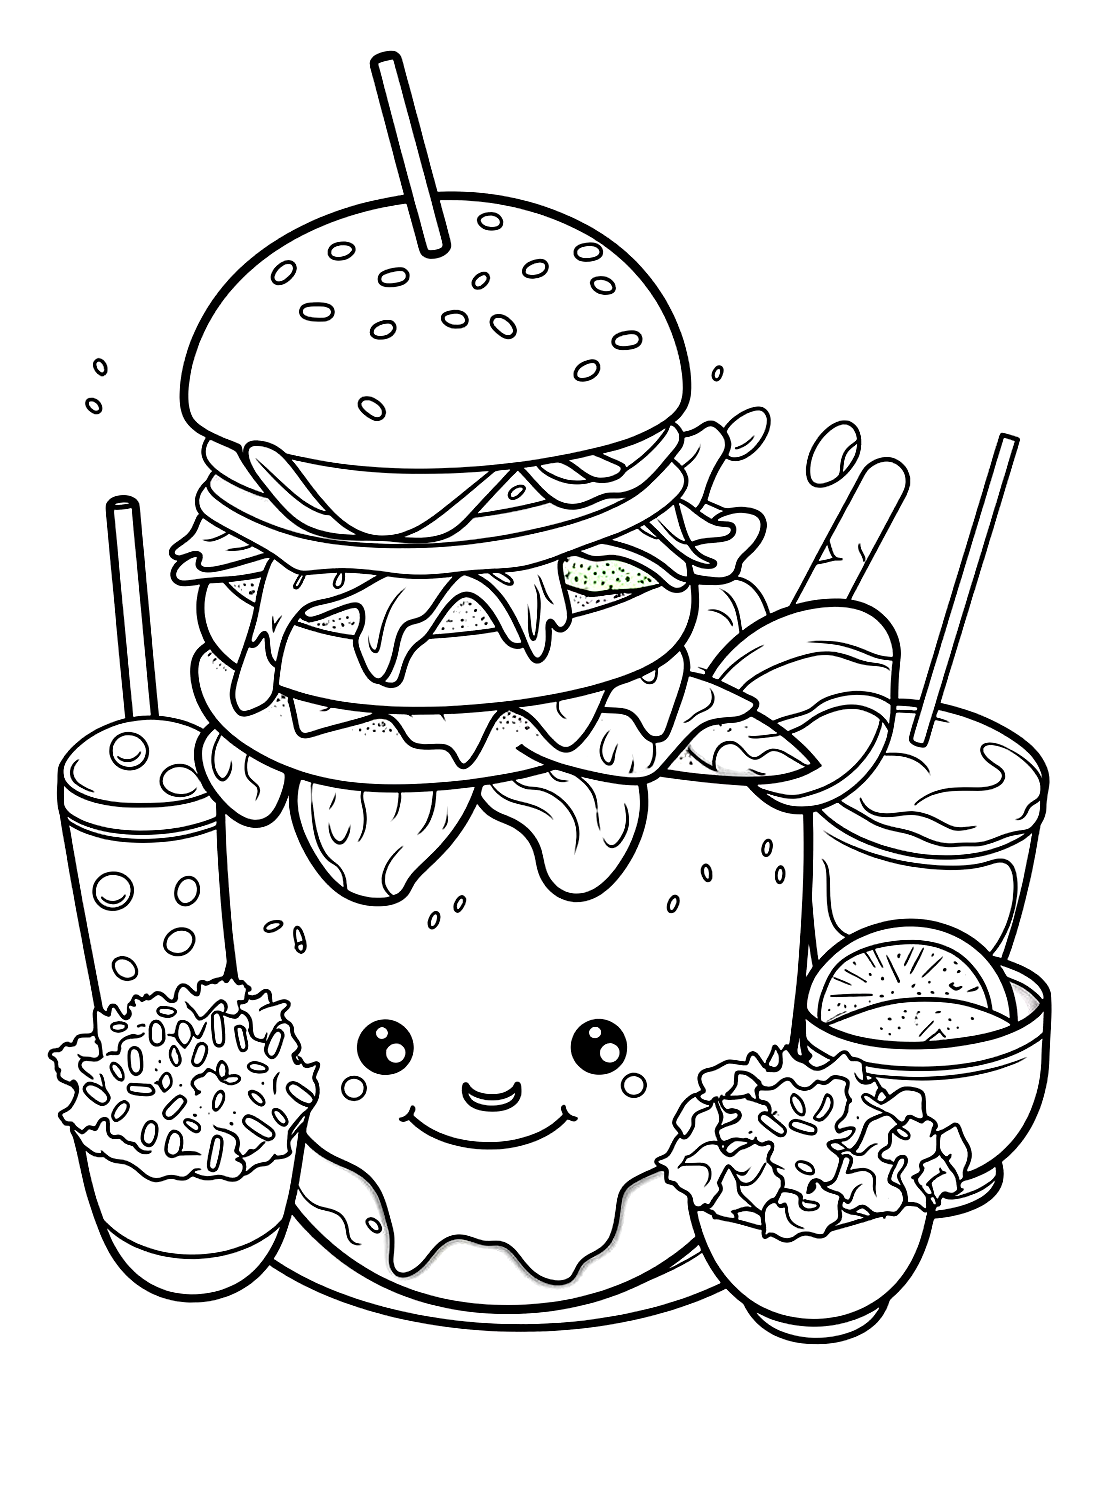 Cute coloring sheets Free Printable Coloring Pages